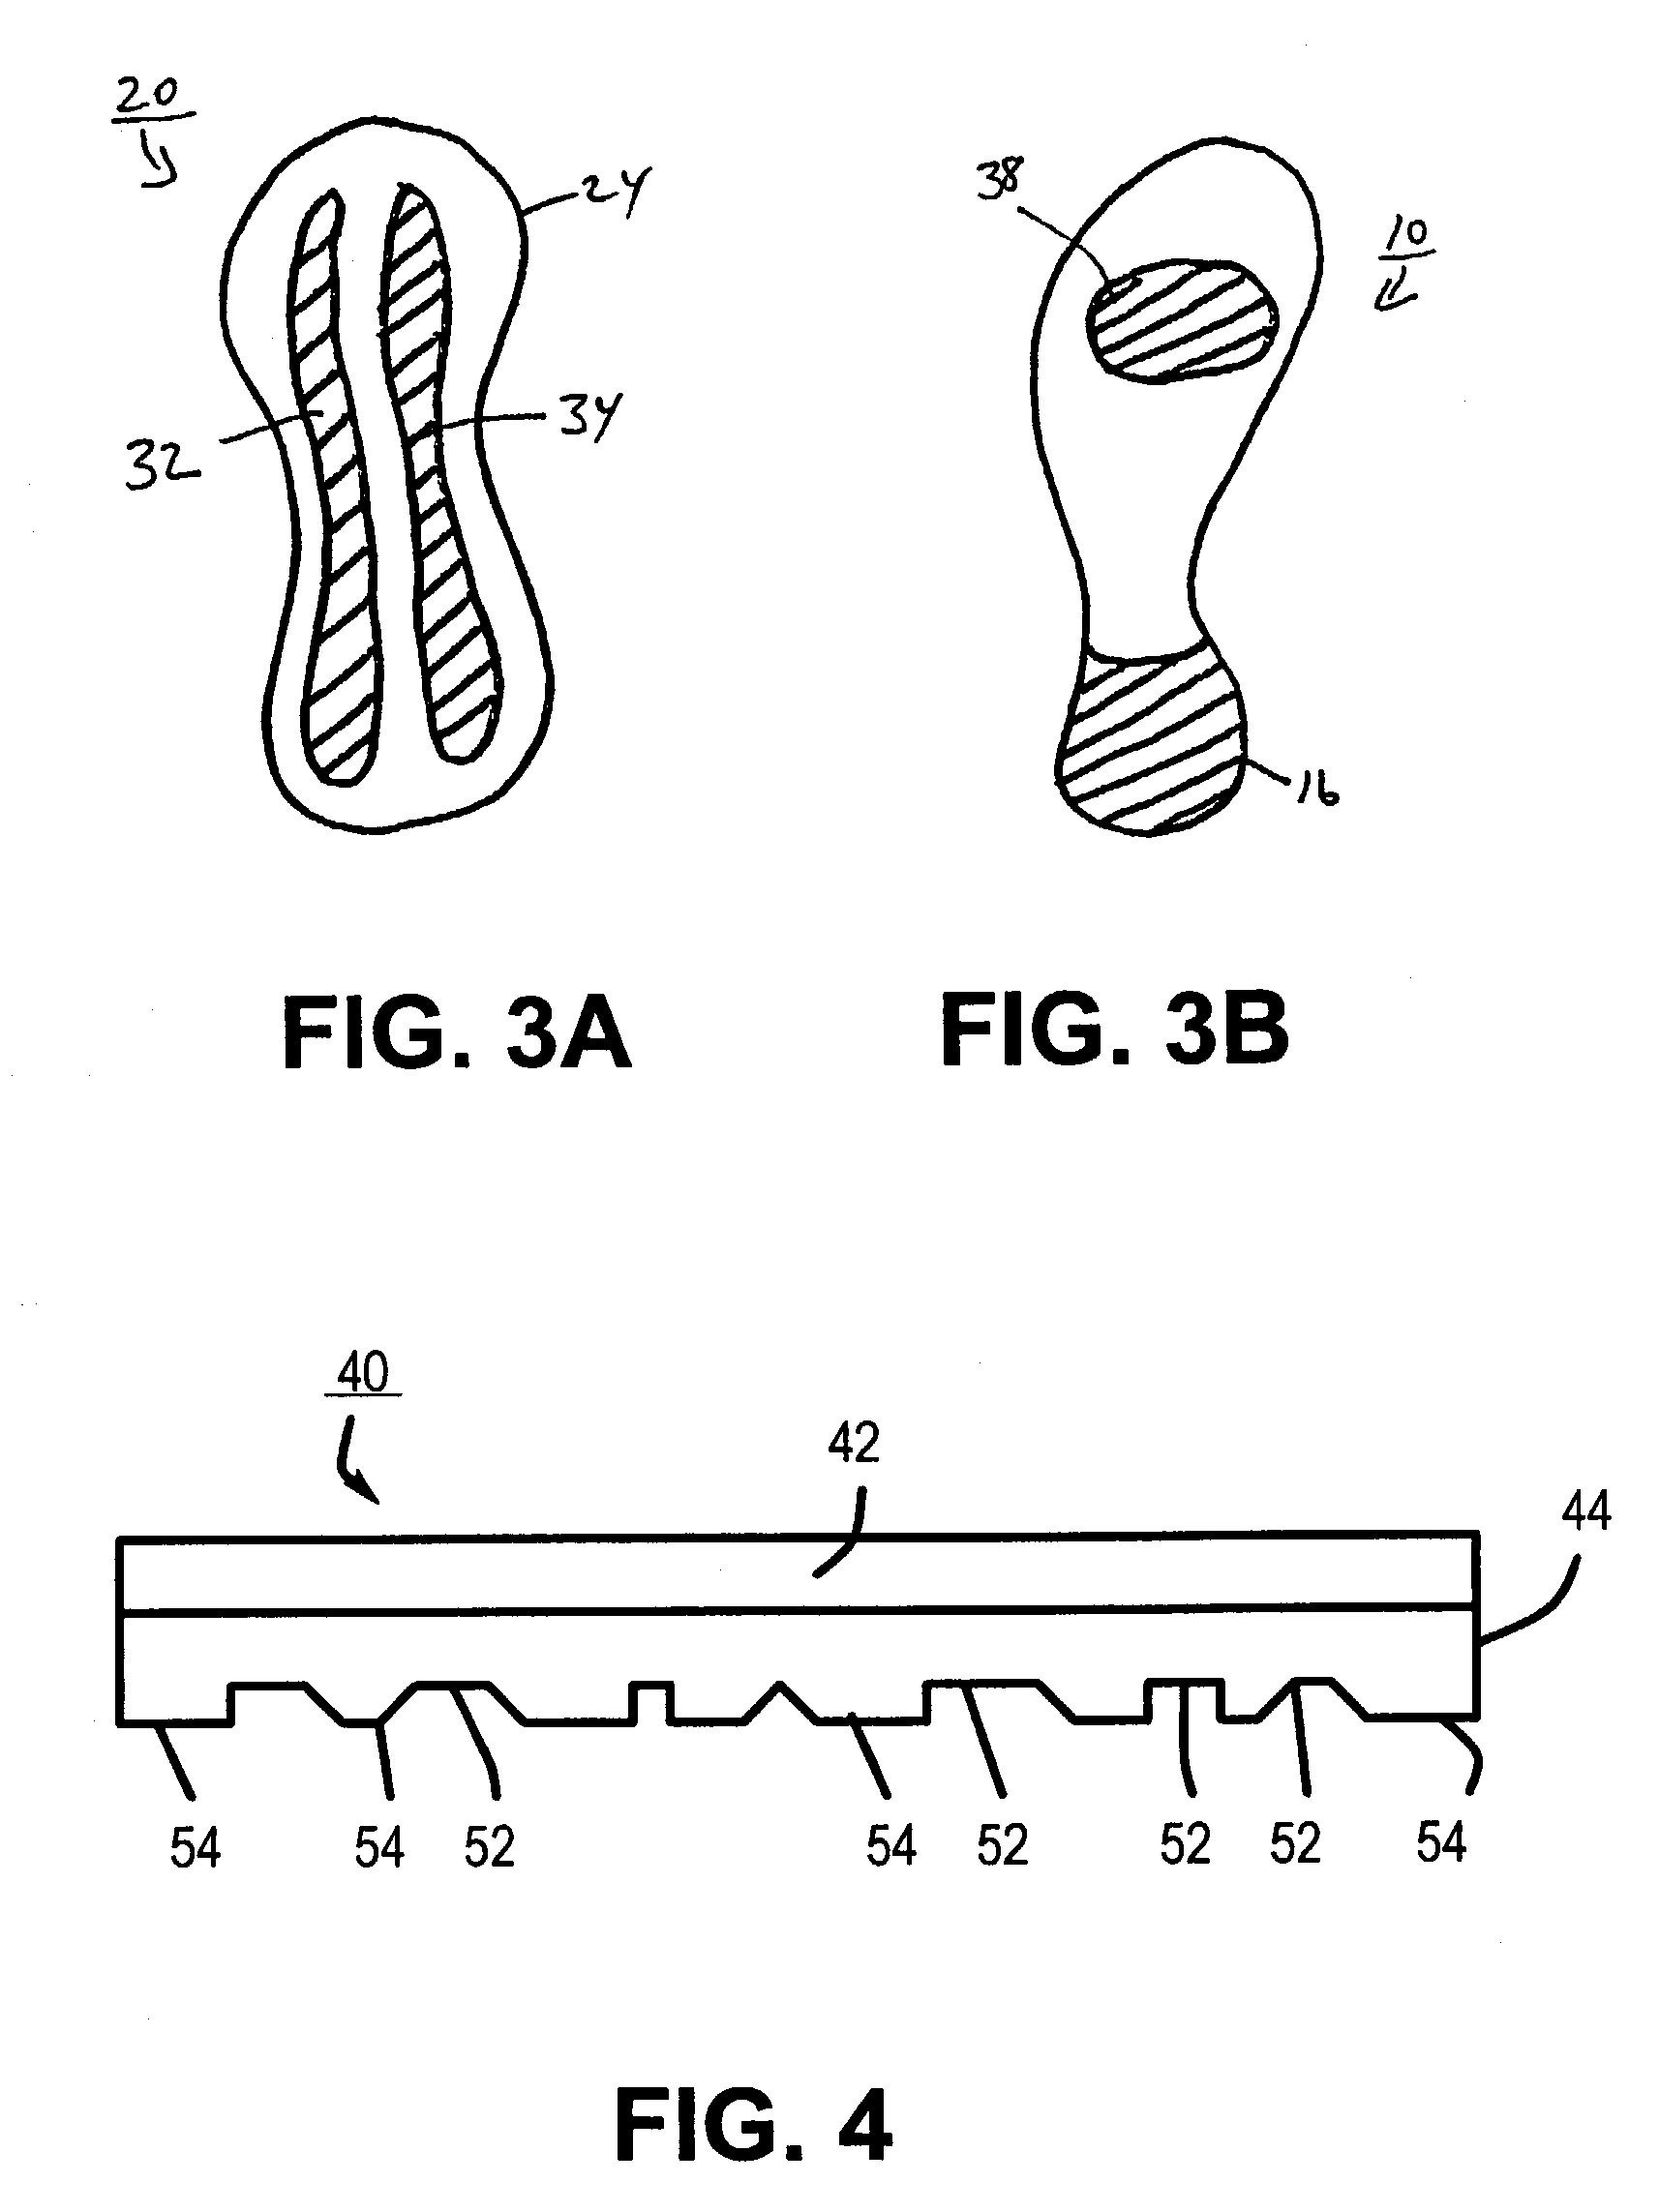 Shoe having an outsole with bonded fibers